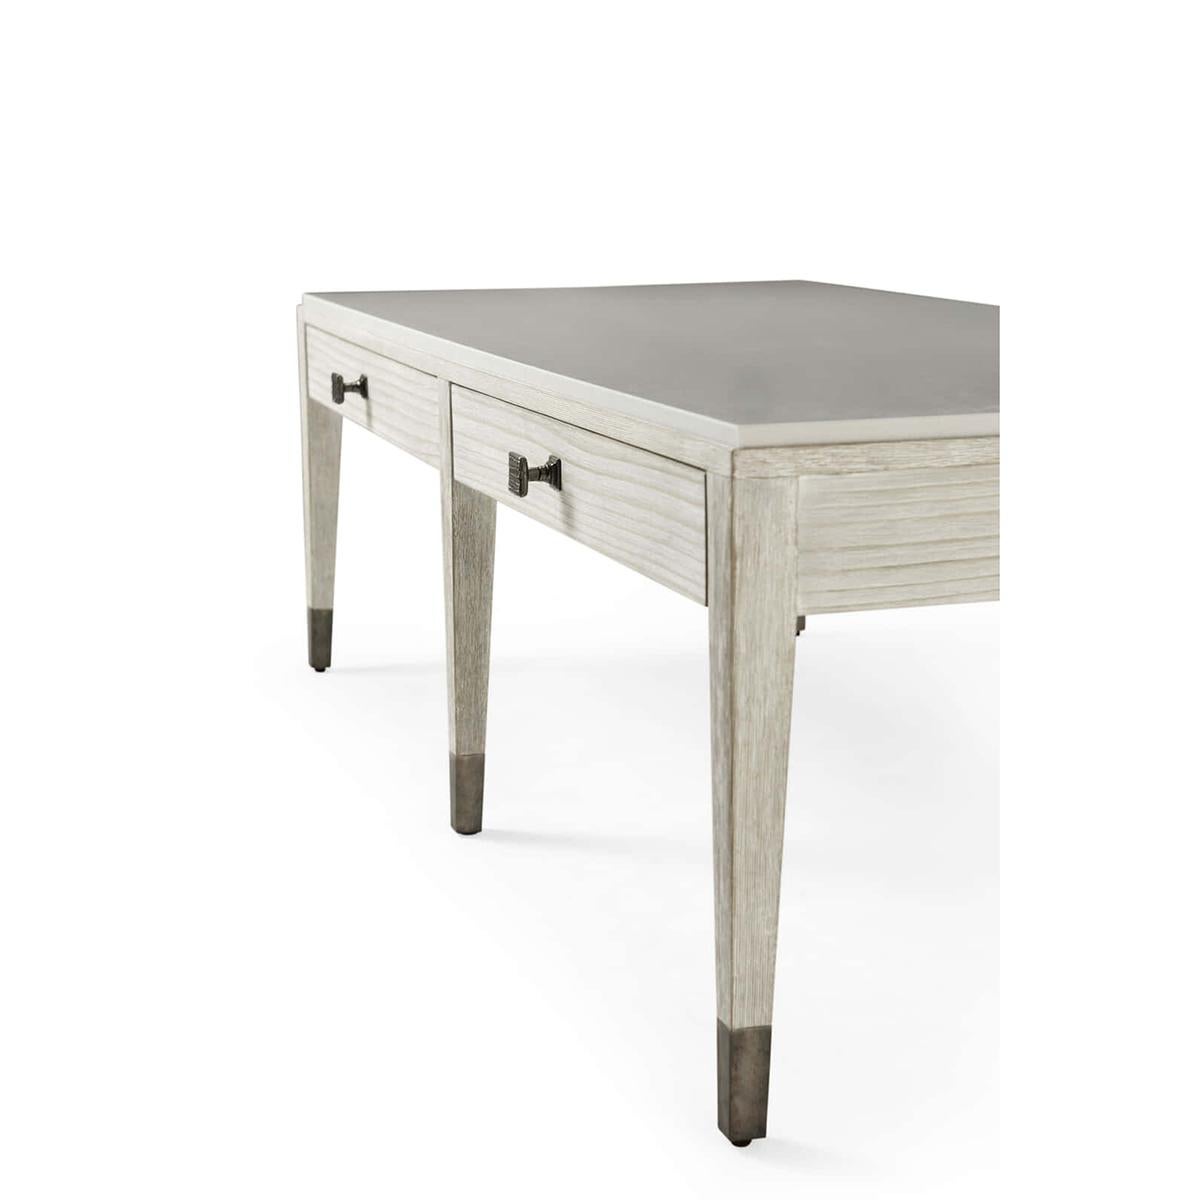 A Coastal style cocktail table, with two drawers, a cerused pine table with a chalky white cast limestone top and two organic ribbed metal knobs in our dark sterling finish.

Dimensions: 58